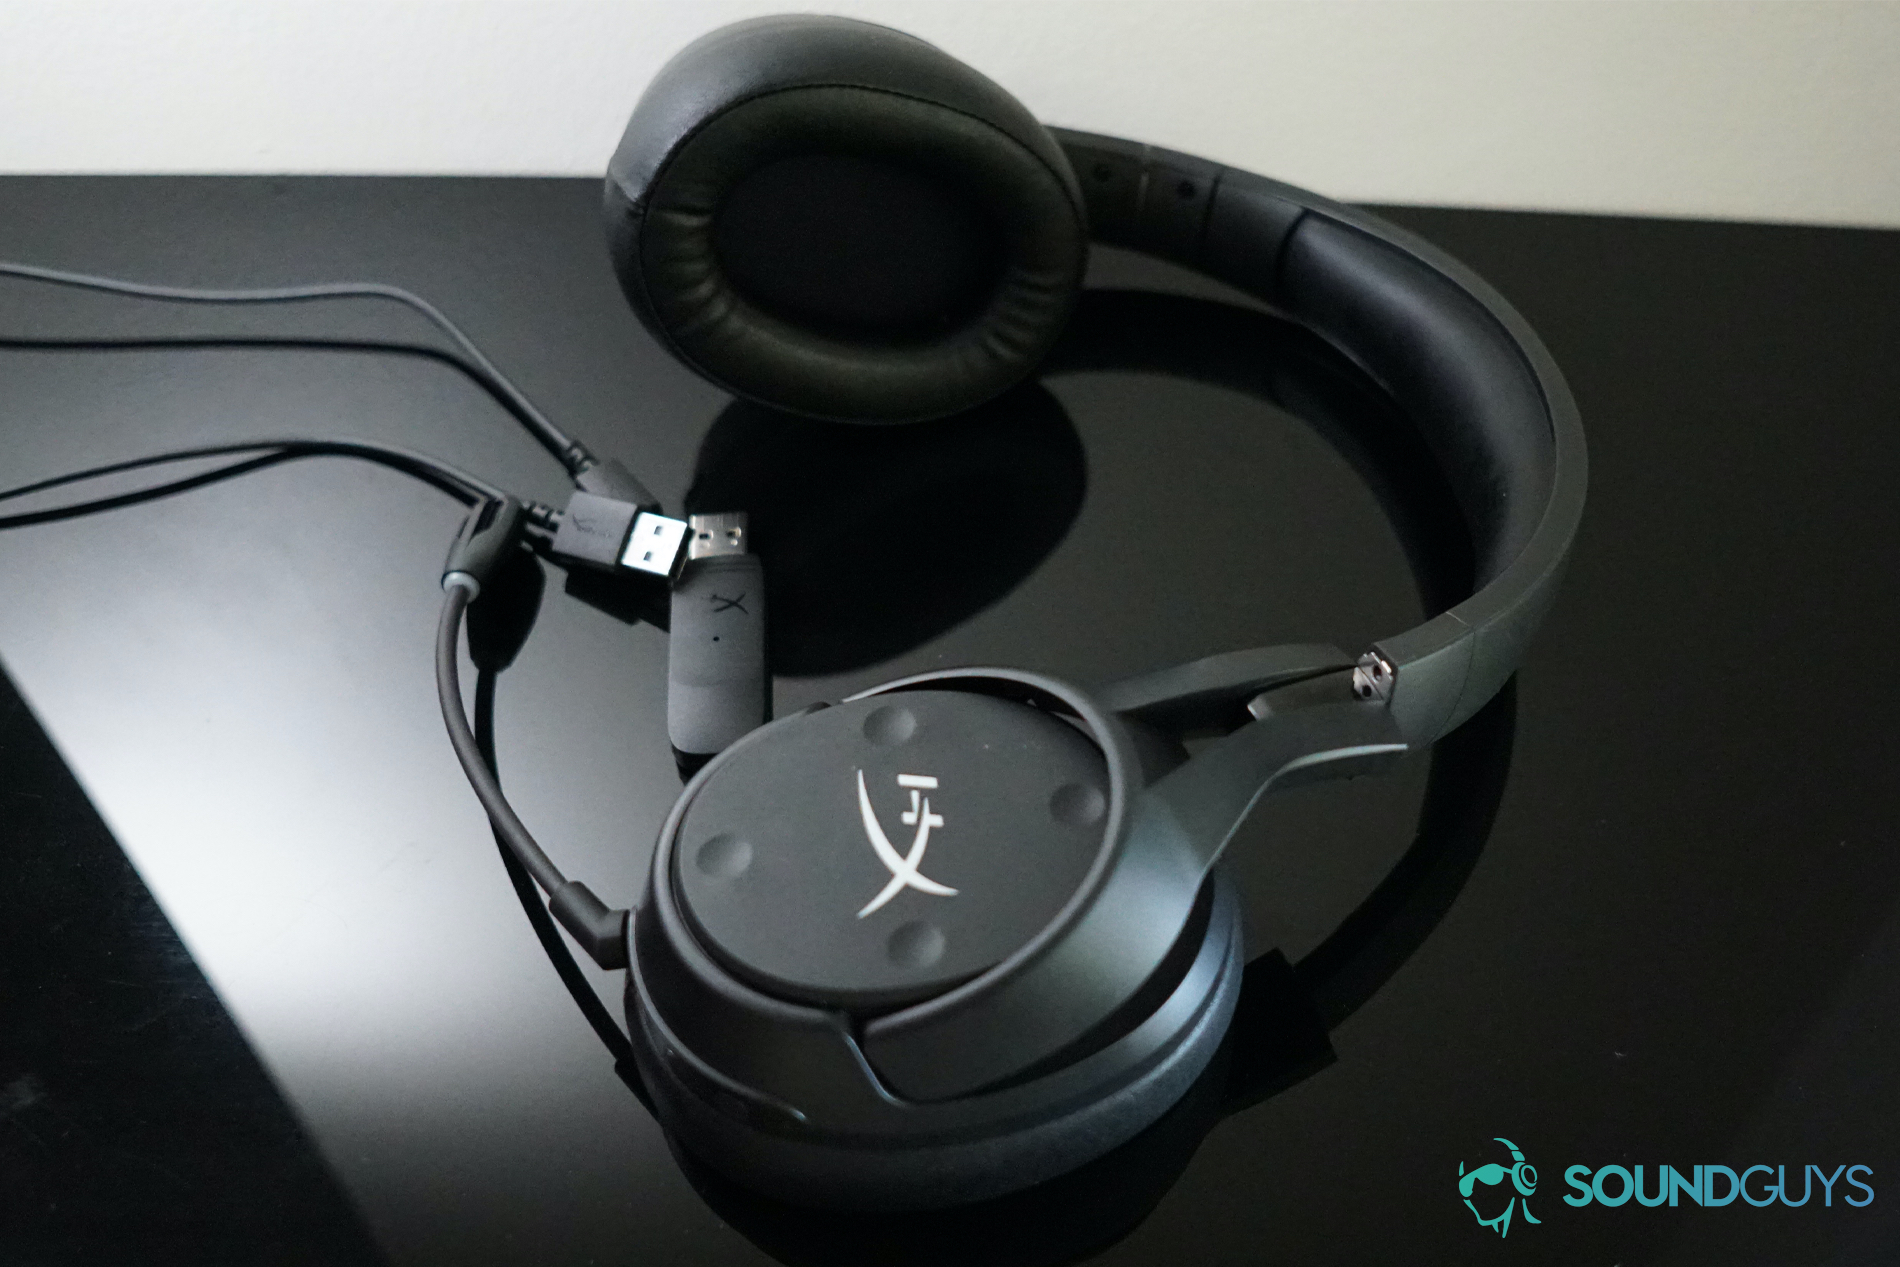 The HyperX Cloud Flight S lays on a reflective surface next to its charging cord and USB dongle.